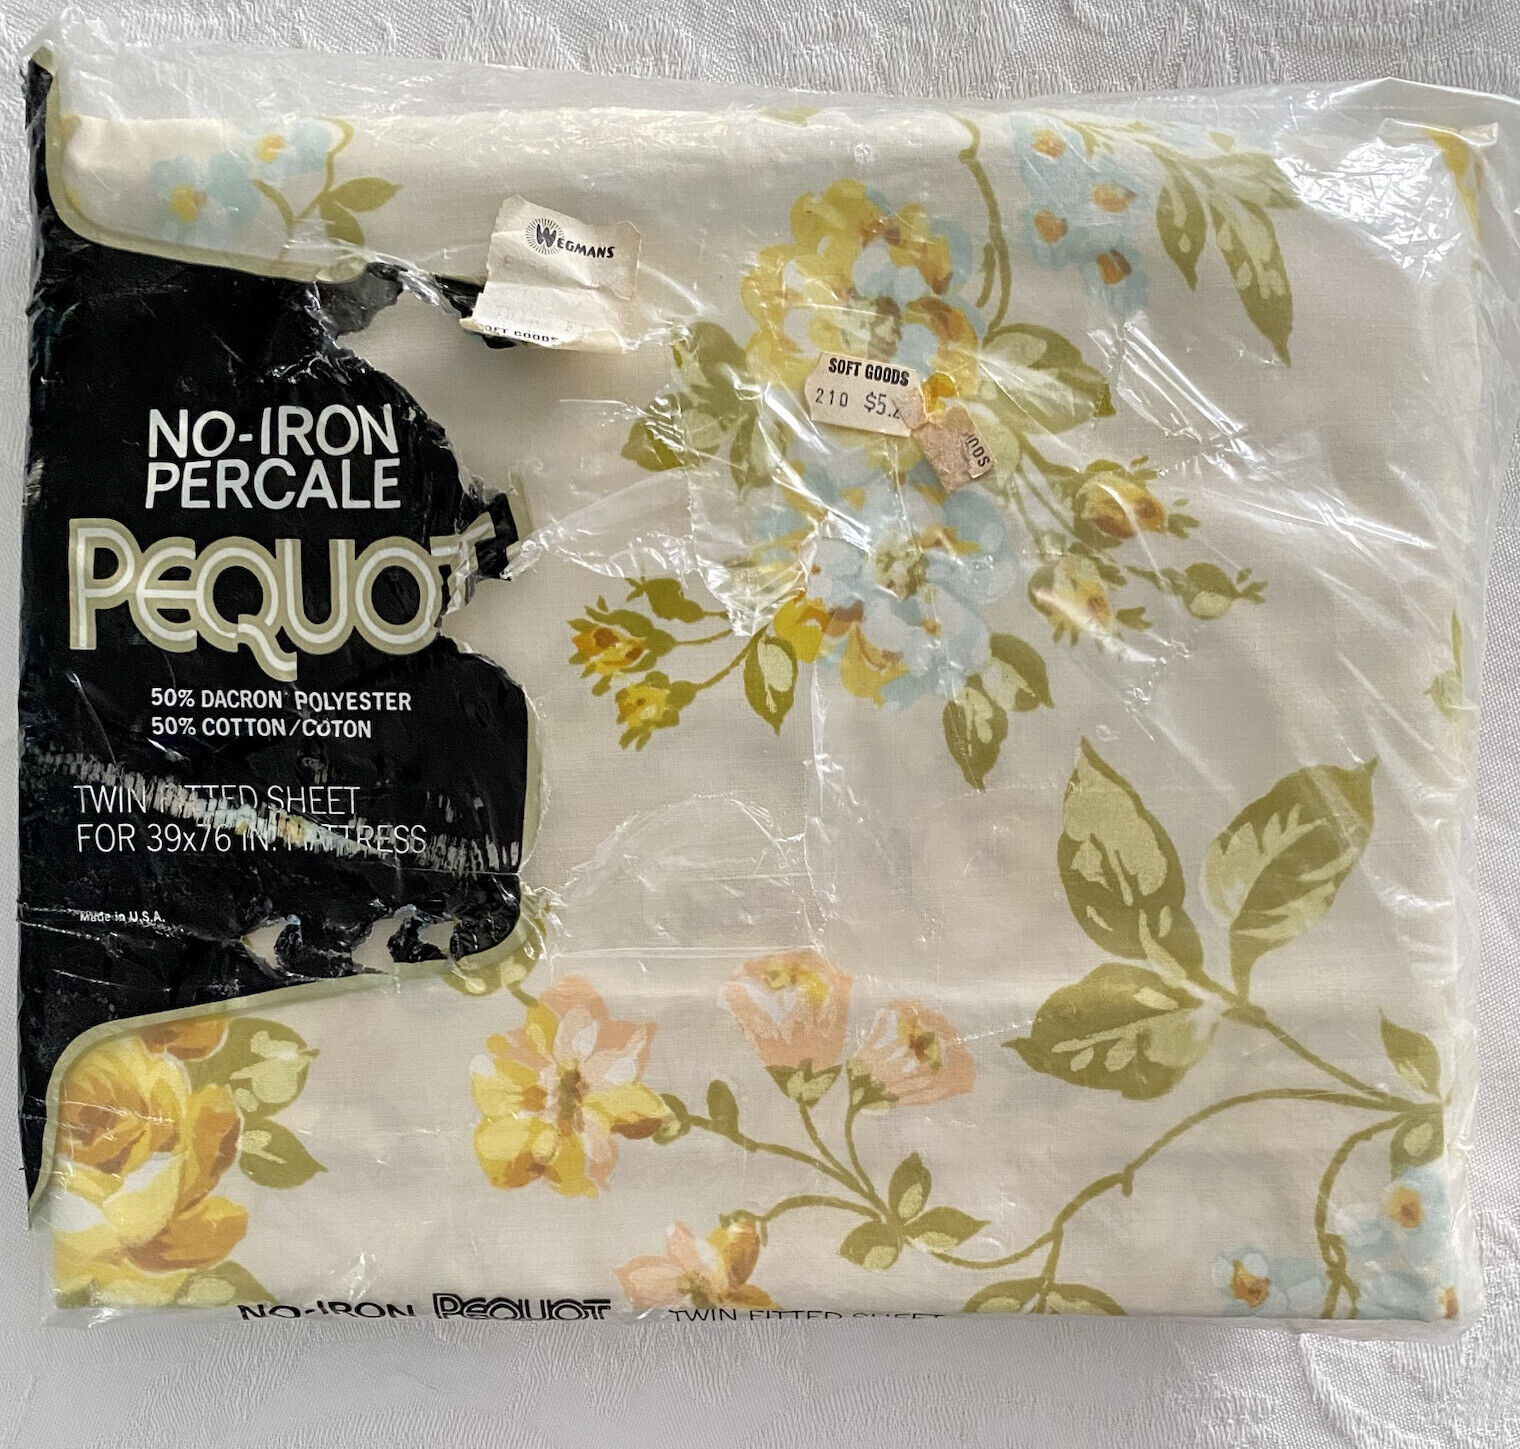 Pequot No Iron Percale Twin Fitted Floral Sheet Rhapsody Flowers 39x76 NOS